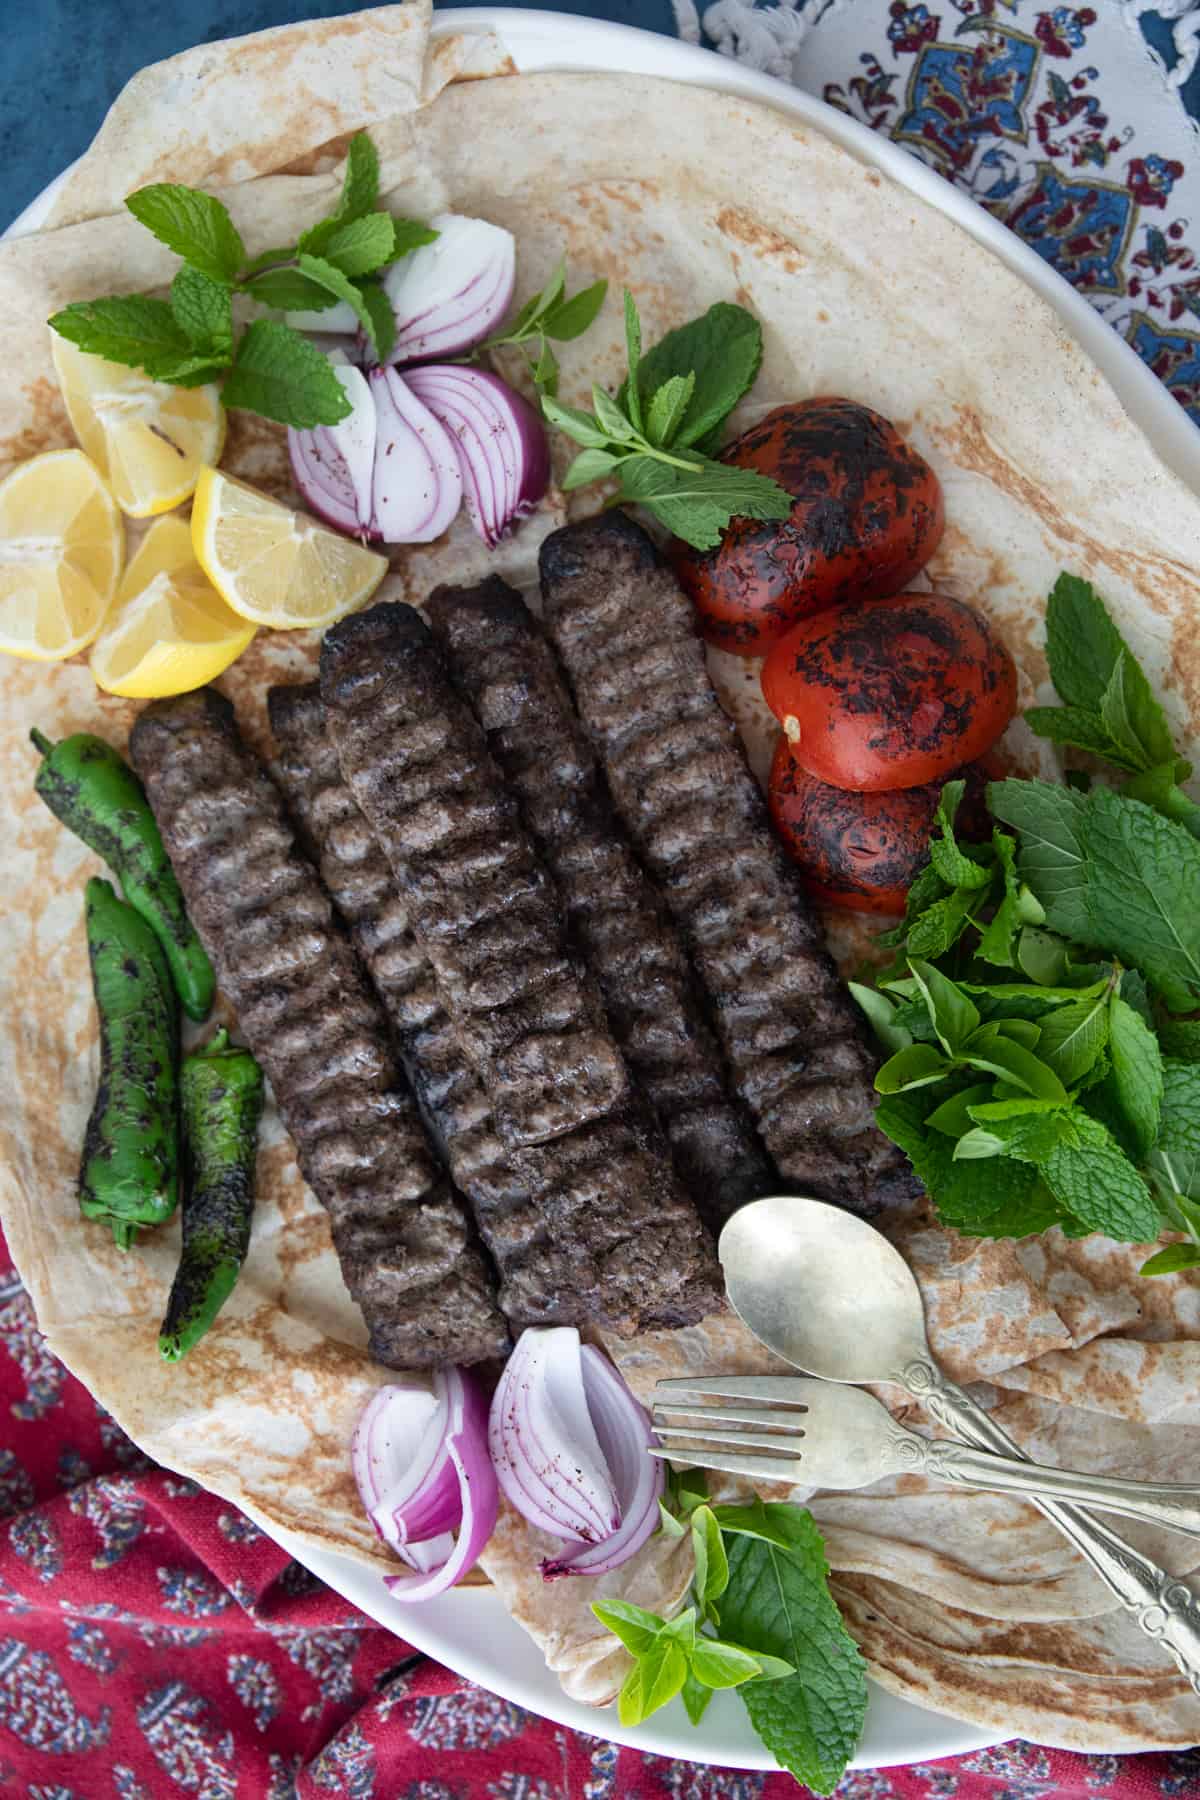 Kabob Koobideh is a popular Persian kabob recipe that's so juicy and delicious. Made with minced meat and onion, this kabob recipe is famous for good reason. If you follow my detailed tutorial, you'll learn how to make the perfect koobideh every time.
